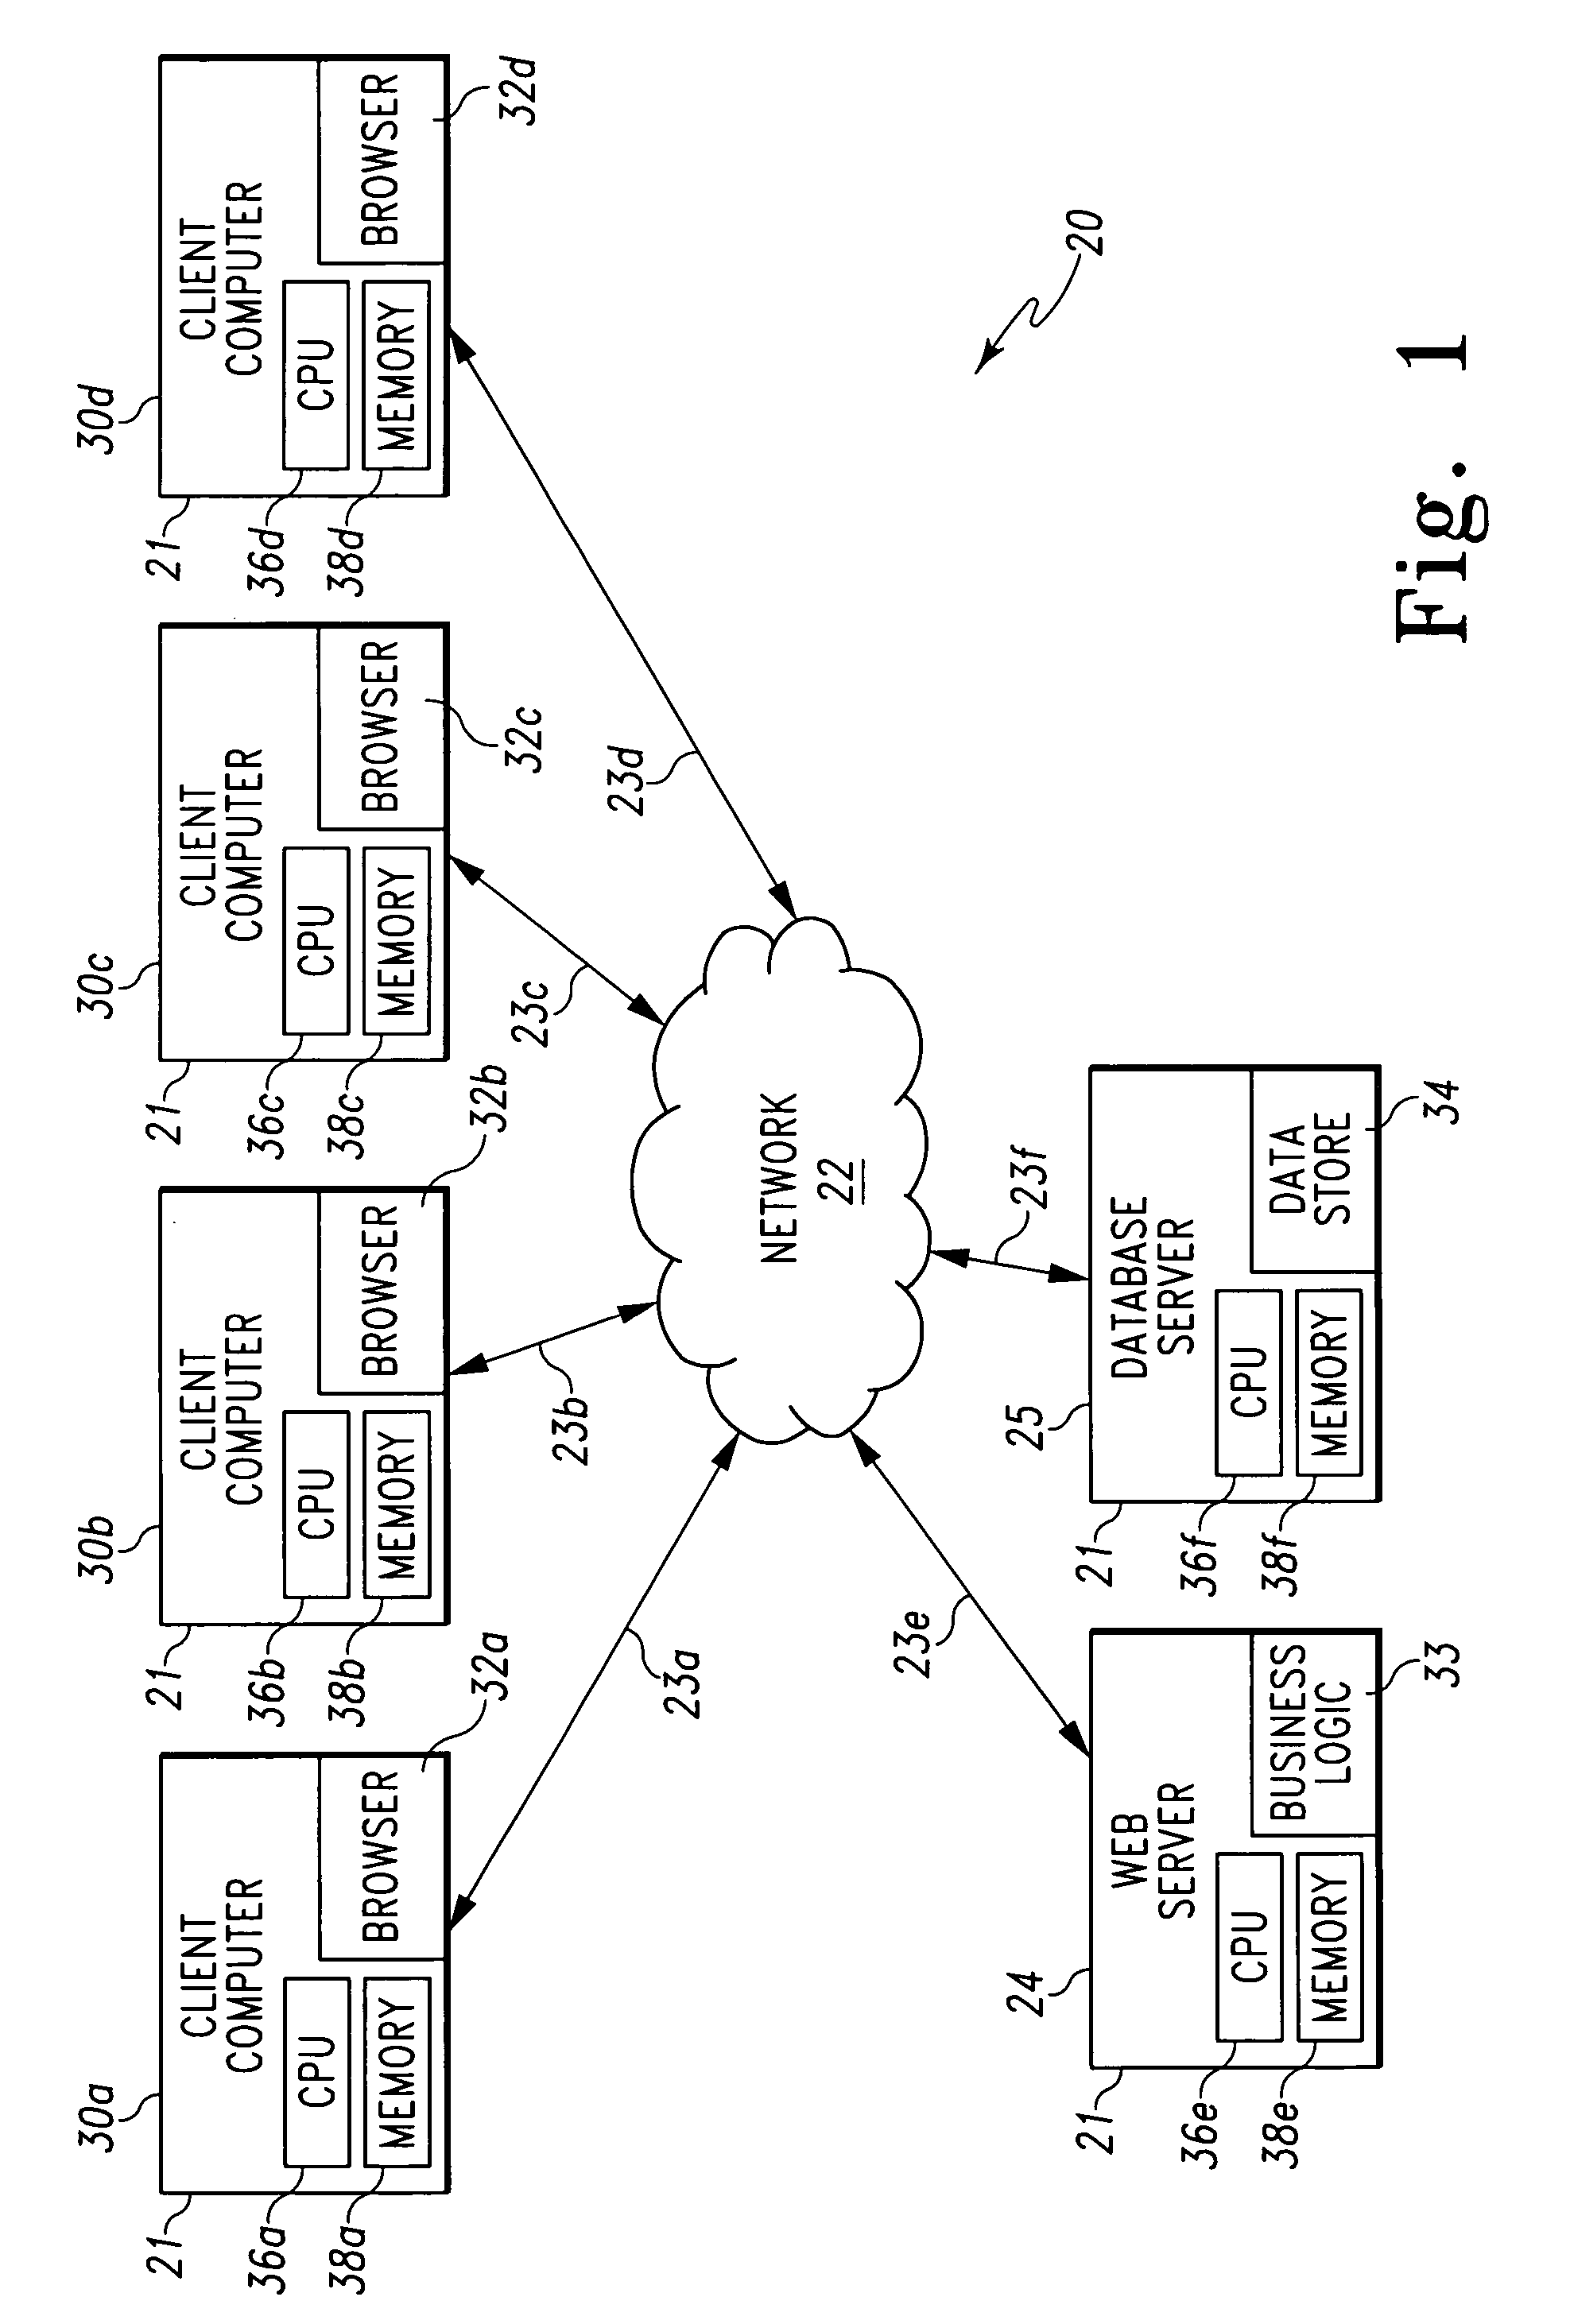 System and method for aiding commercial property assessment